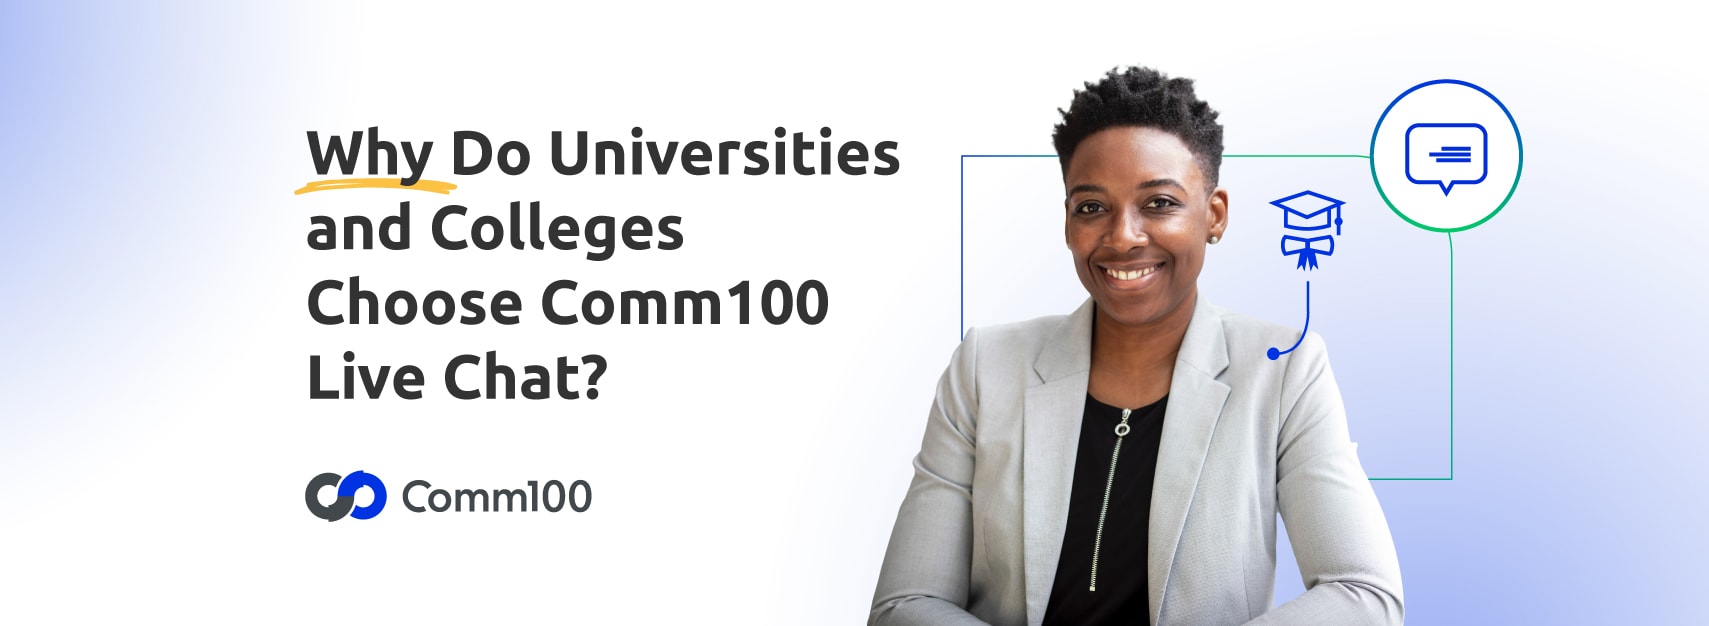 Why are Universities & Colleges Choosing Comm100 Live Chat featured image